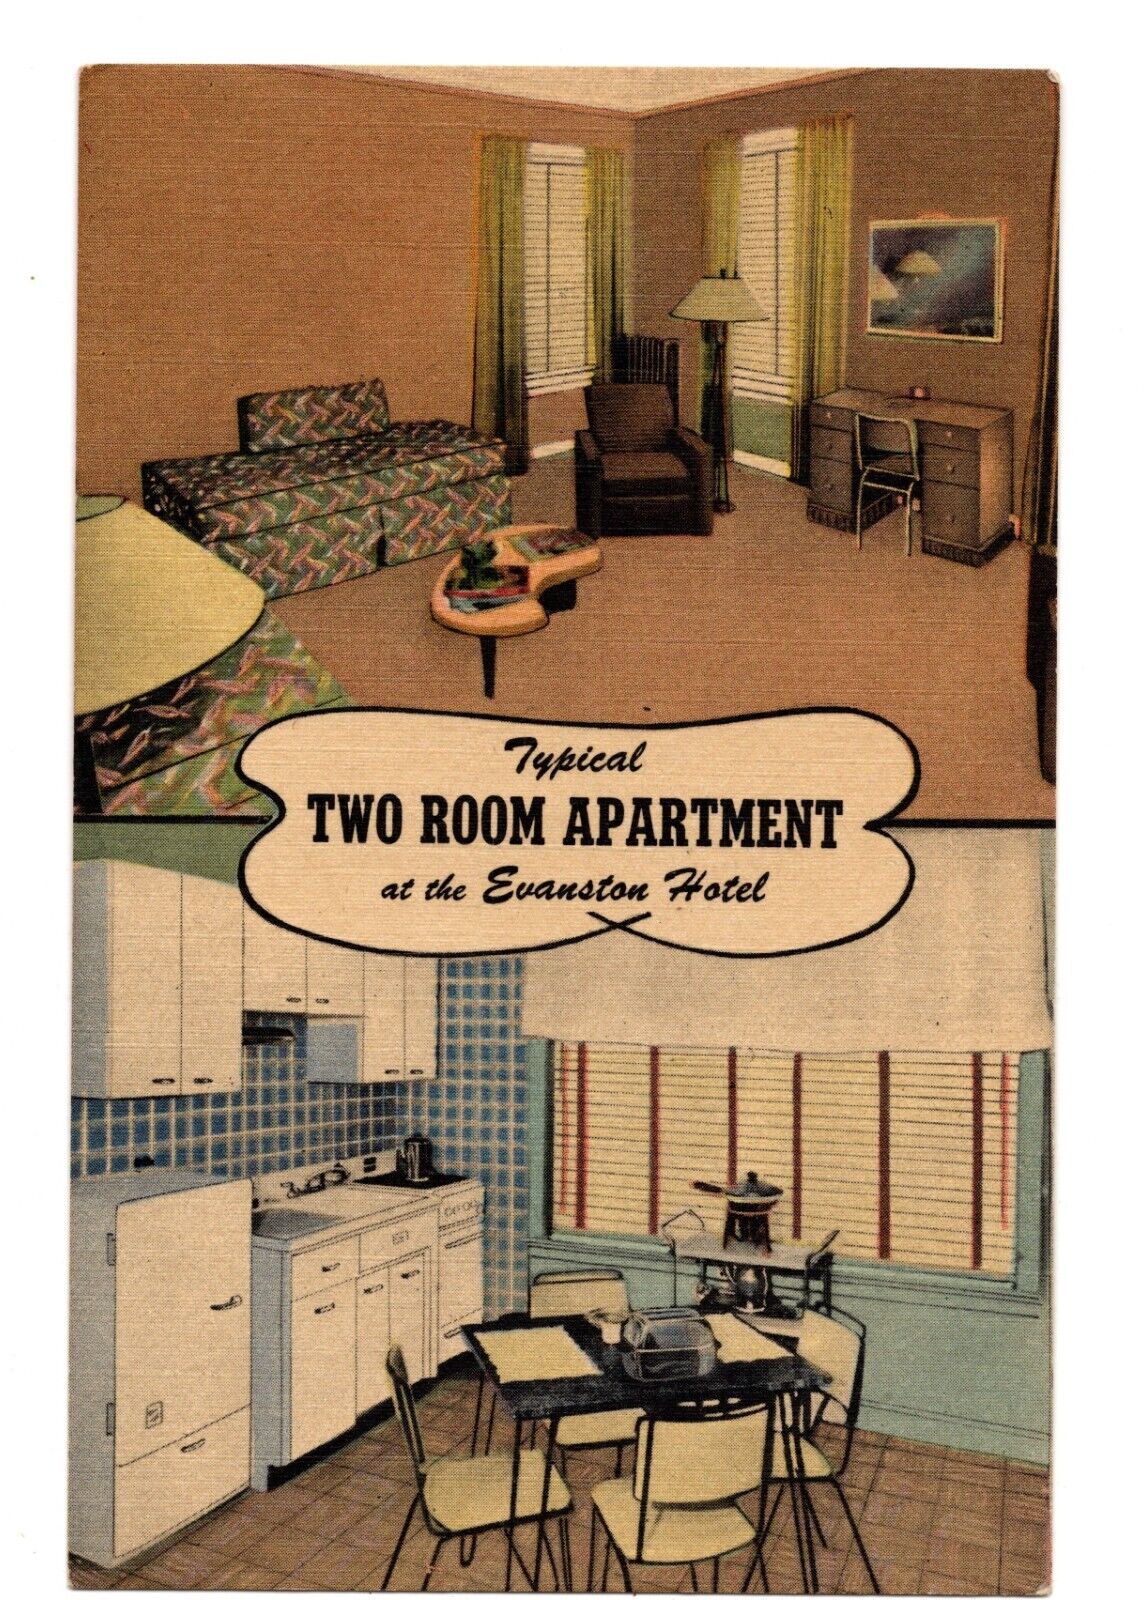 Vintage Linen Postcard - Typical Two Room Apartment at the Evanston Hotel